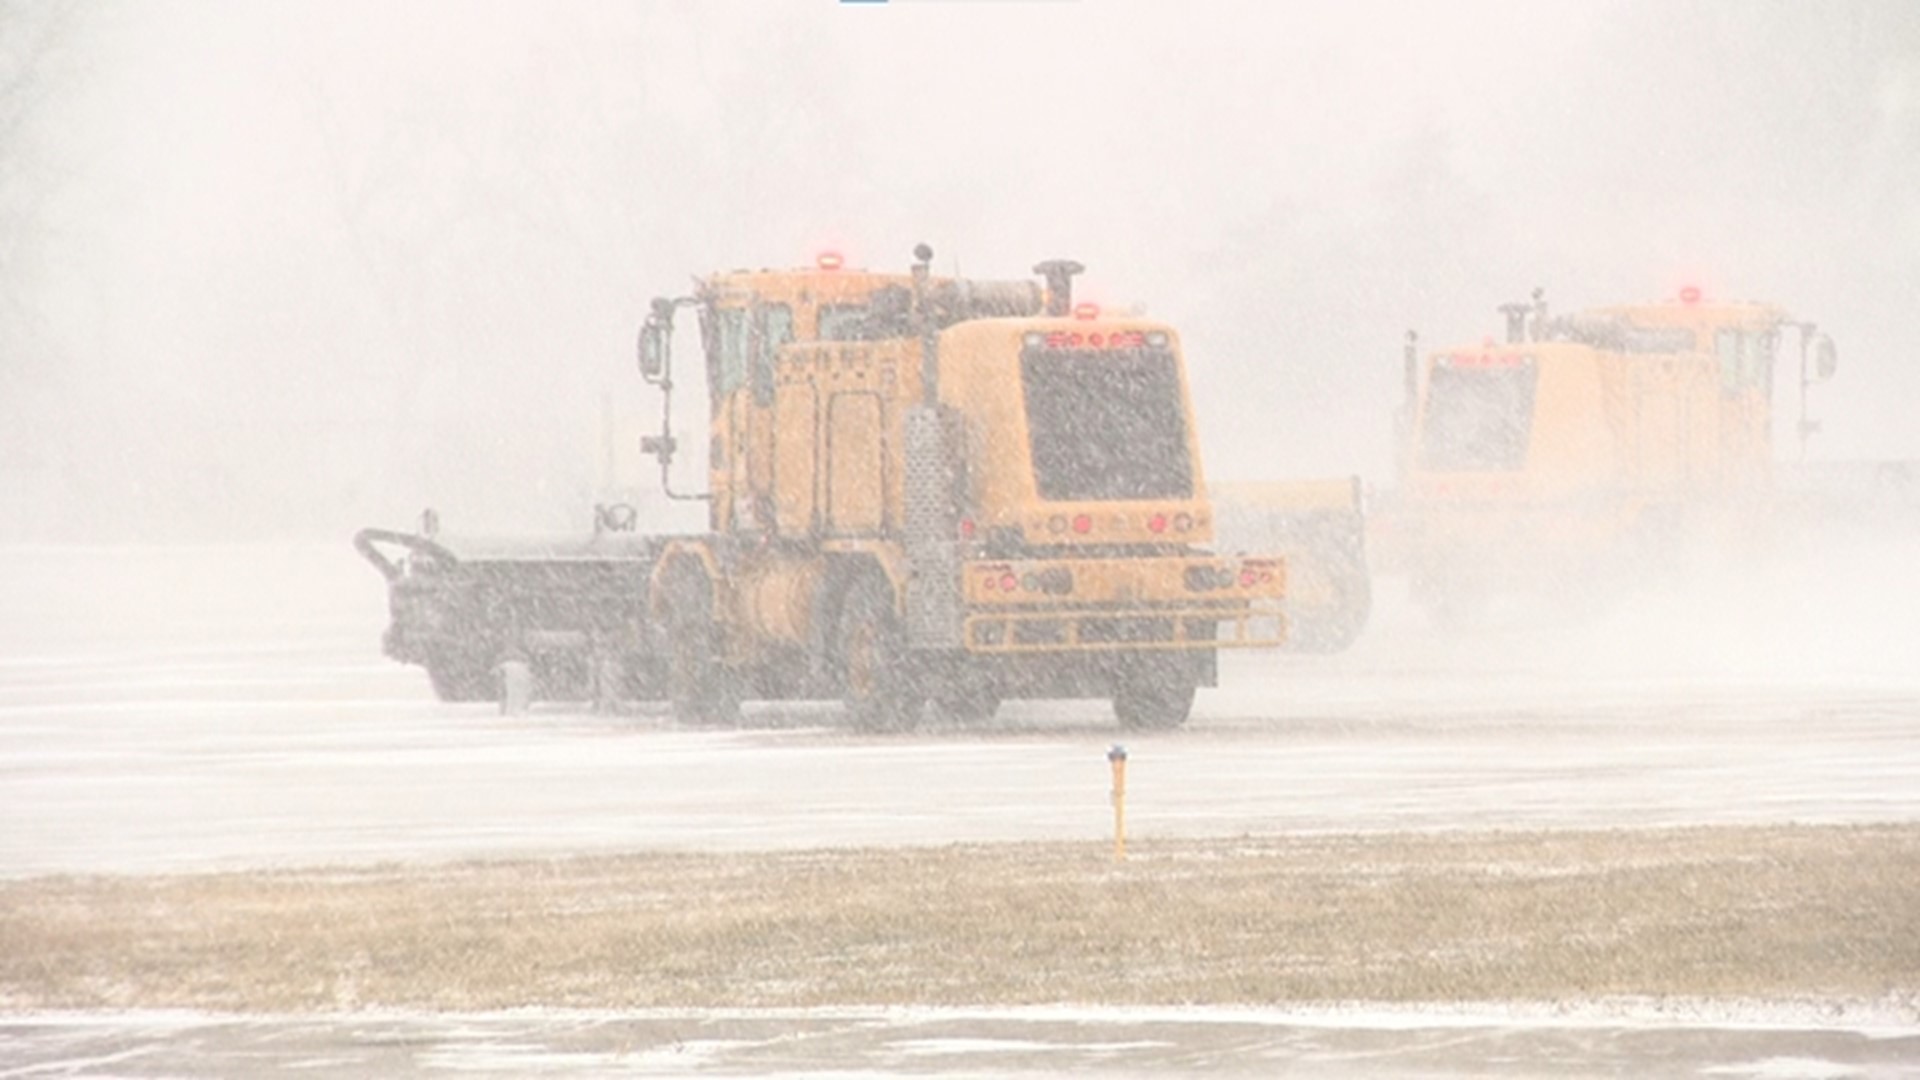 Crews started working at about 5 a.m. Thursday clearing snow from the main runway at the airport. Crews expect to return late Thursday for more 12-hour shifts.